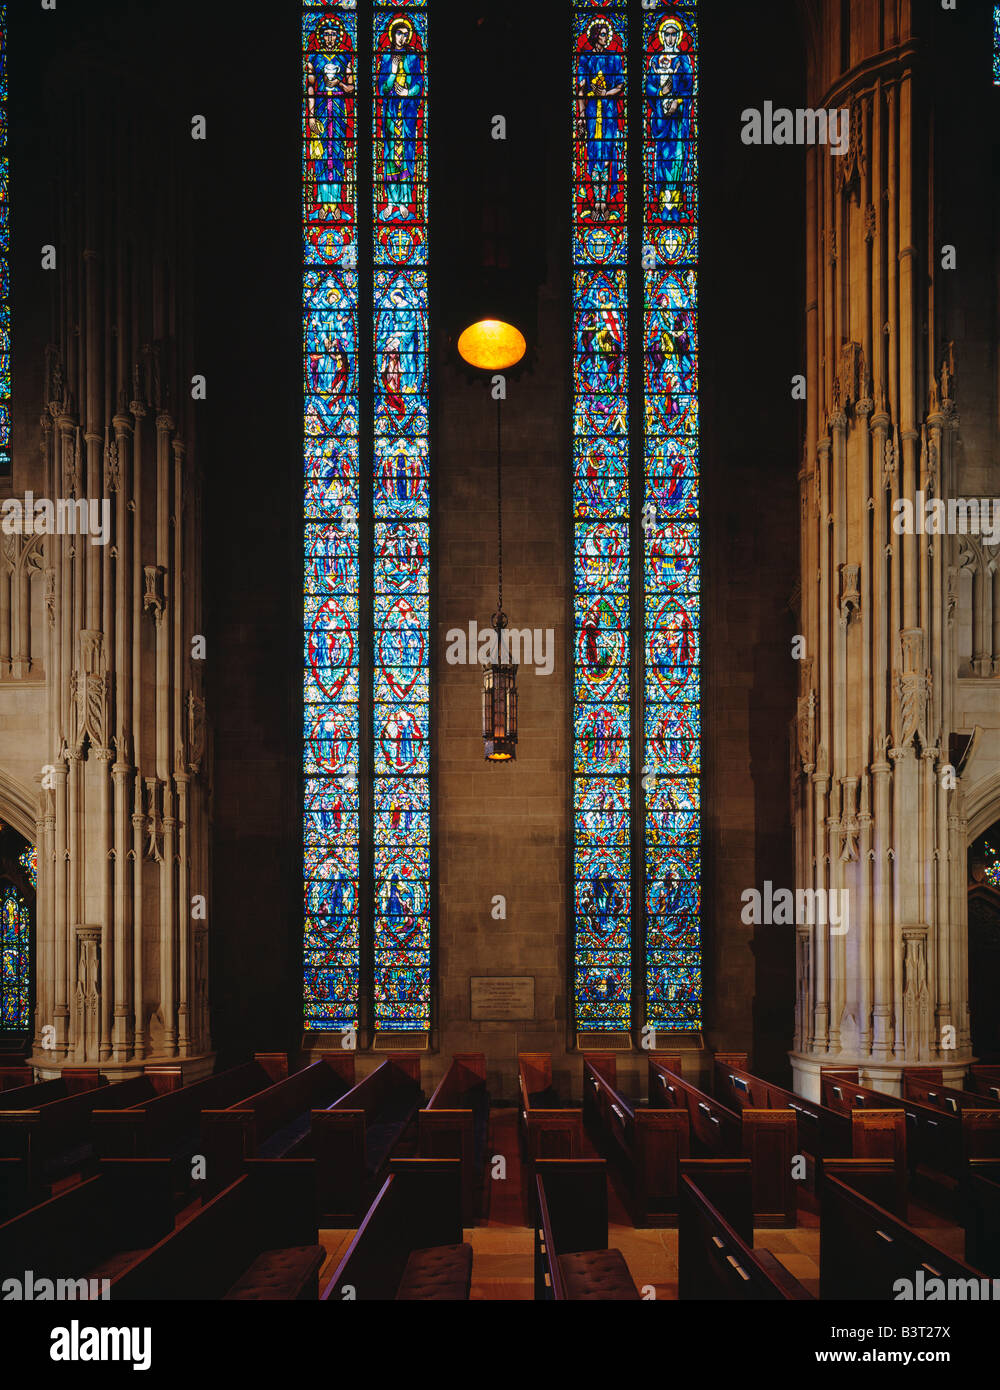 STAINED GLASS WINDOWS, HEINZ MEMORIAL CHAPEL, UNIVERSITY OF PITTSBURGH; FRENCH GOTHIC ARCHITECTURE, PITTSBURGH, PENNSYLVANIA Stock Photo